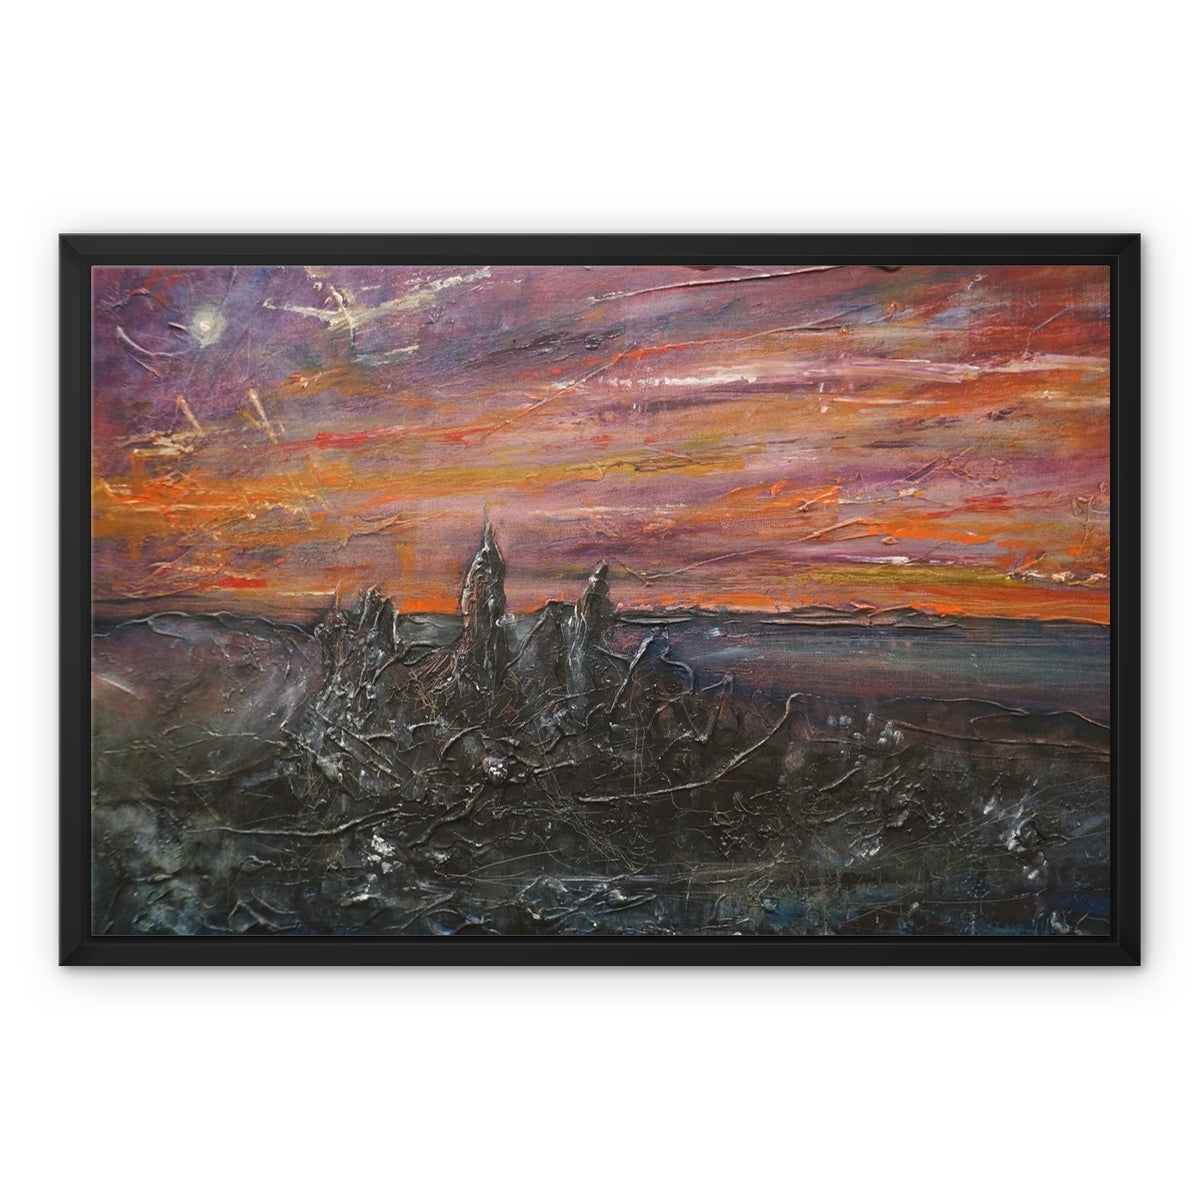 Storr Moonlight Skye Painting | Framed Canvas-Floating Framed Canvas Prints-Skye Art Gallery-24"x18"-Black Frame-Paintings, Prints, Homeware, Art Gifts From Scotland By Scottish Artist Kevin Hunter